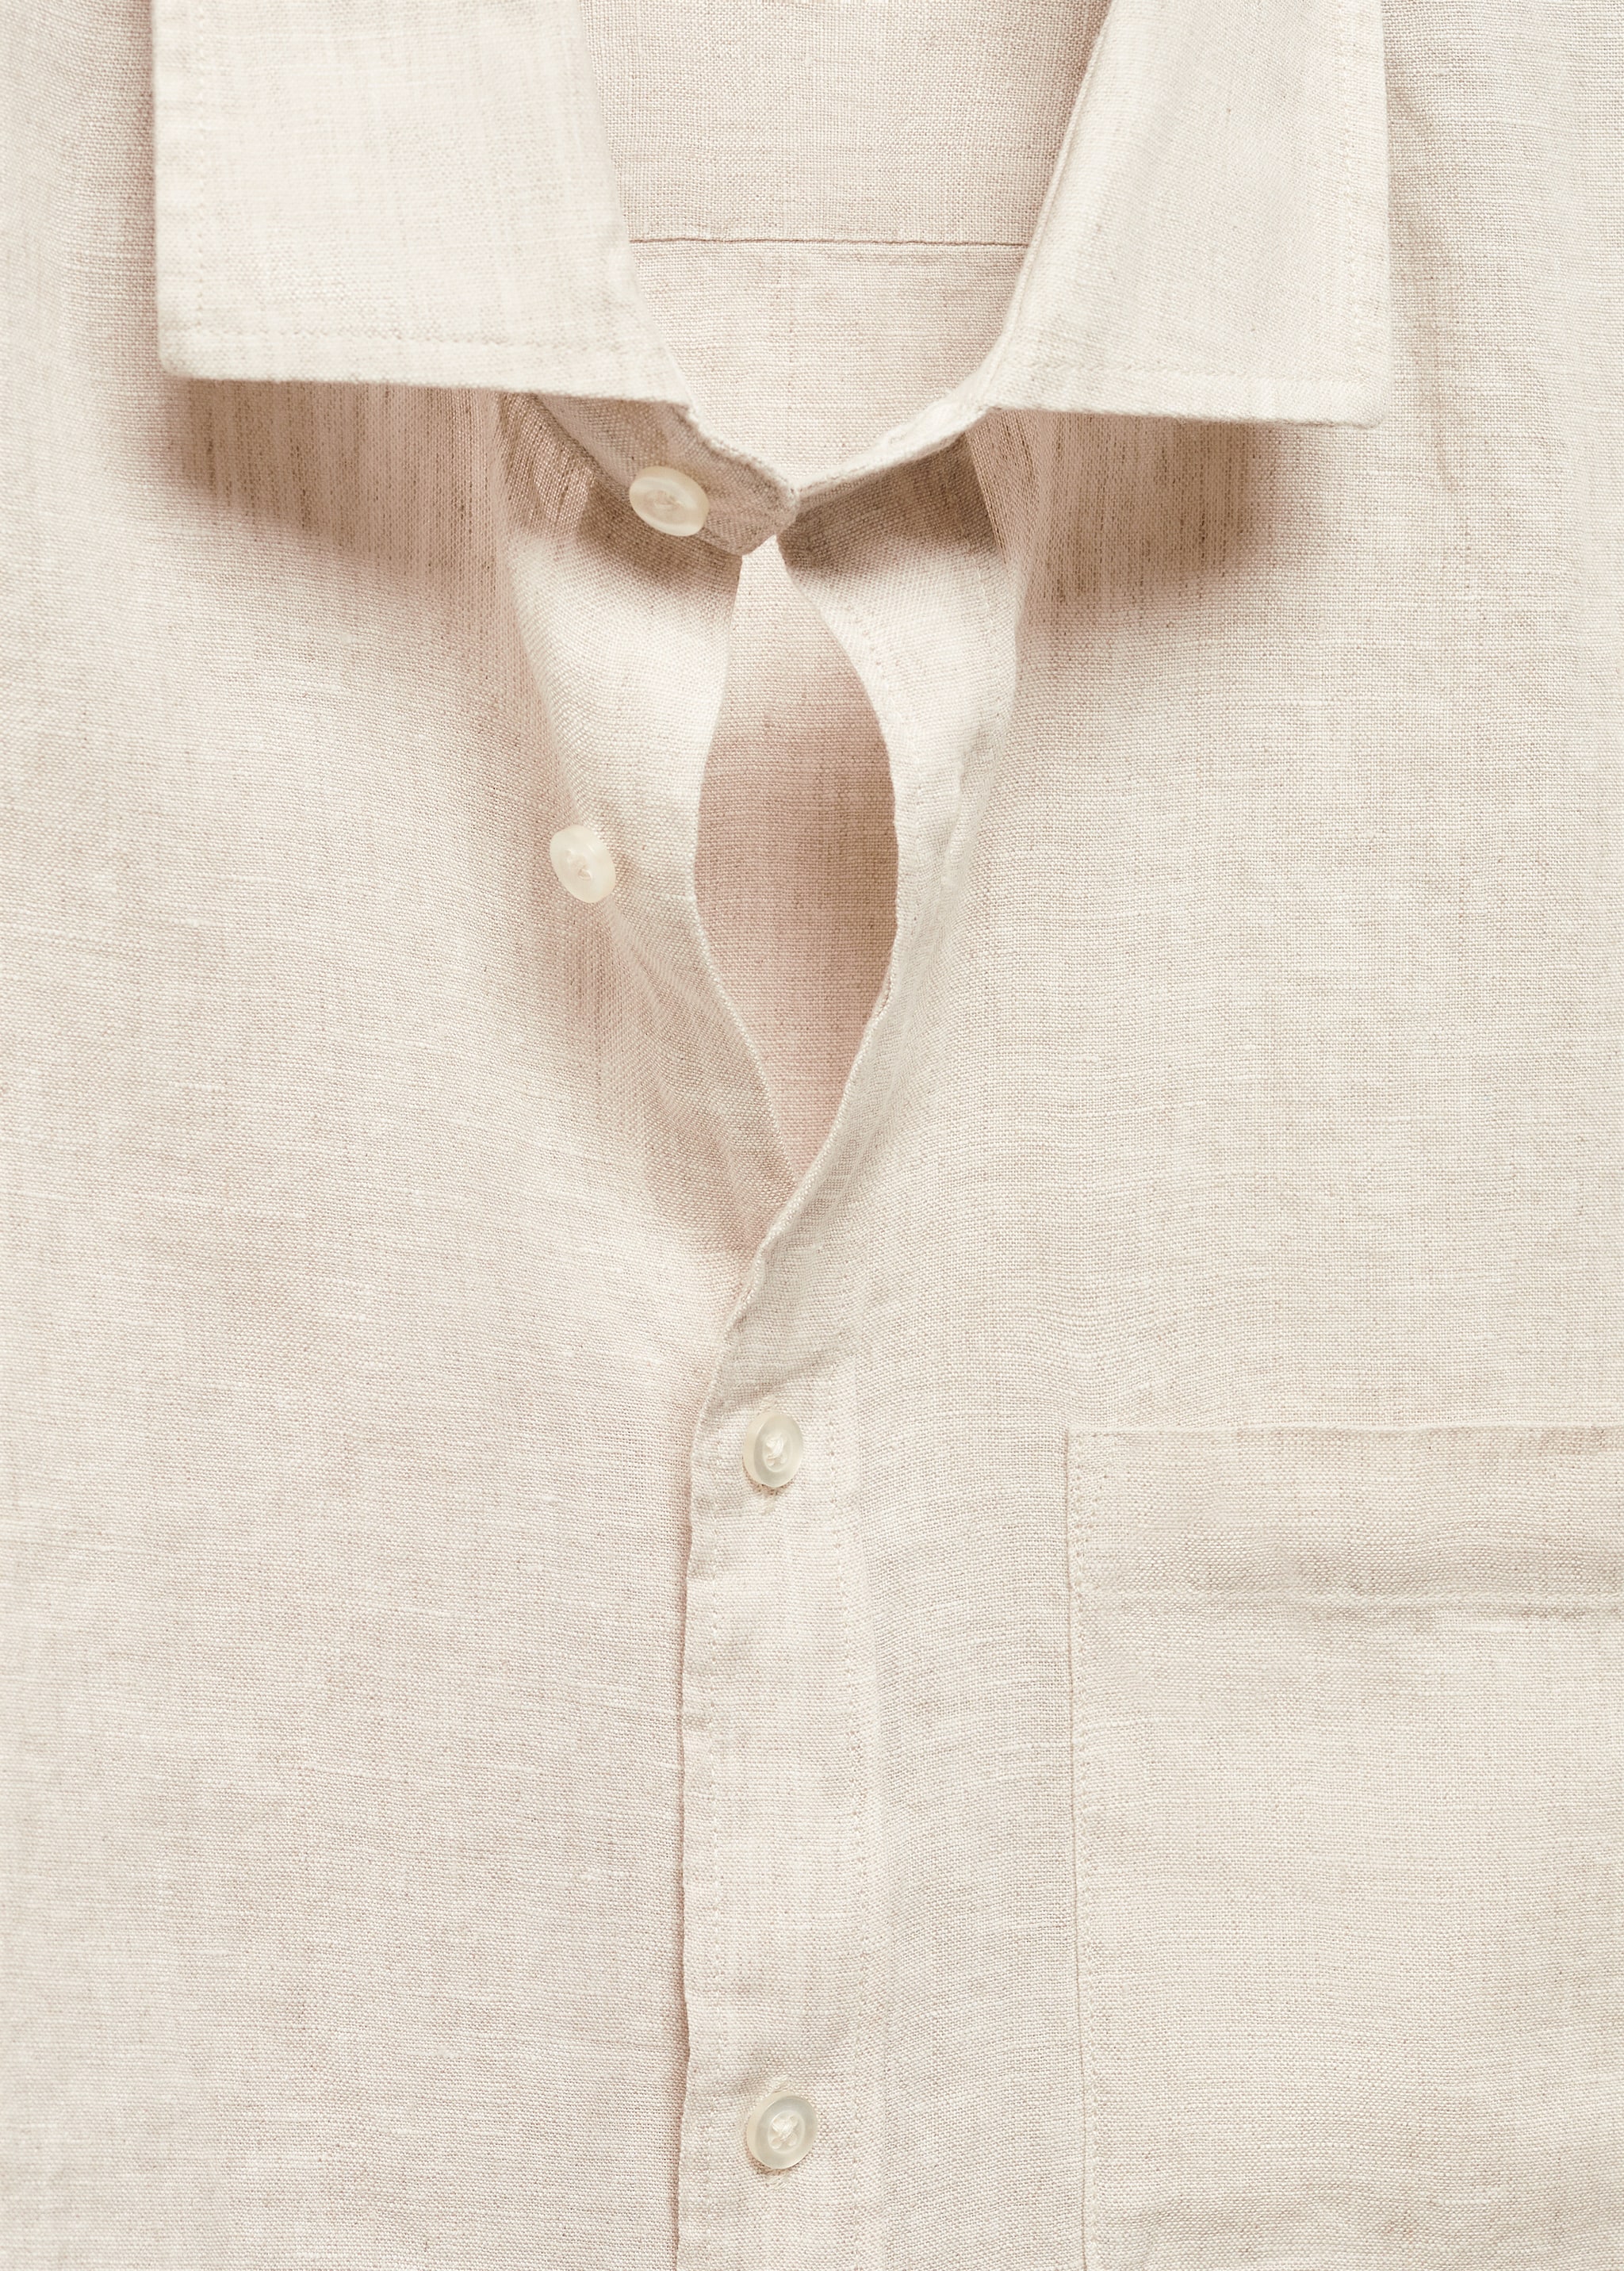 Classic fit 100% linen shirt - Details of the article 8